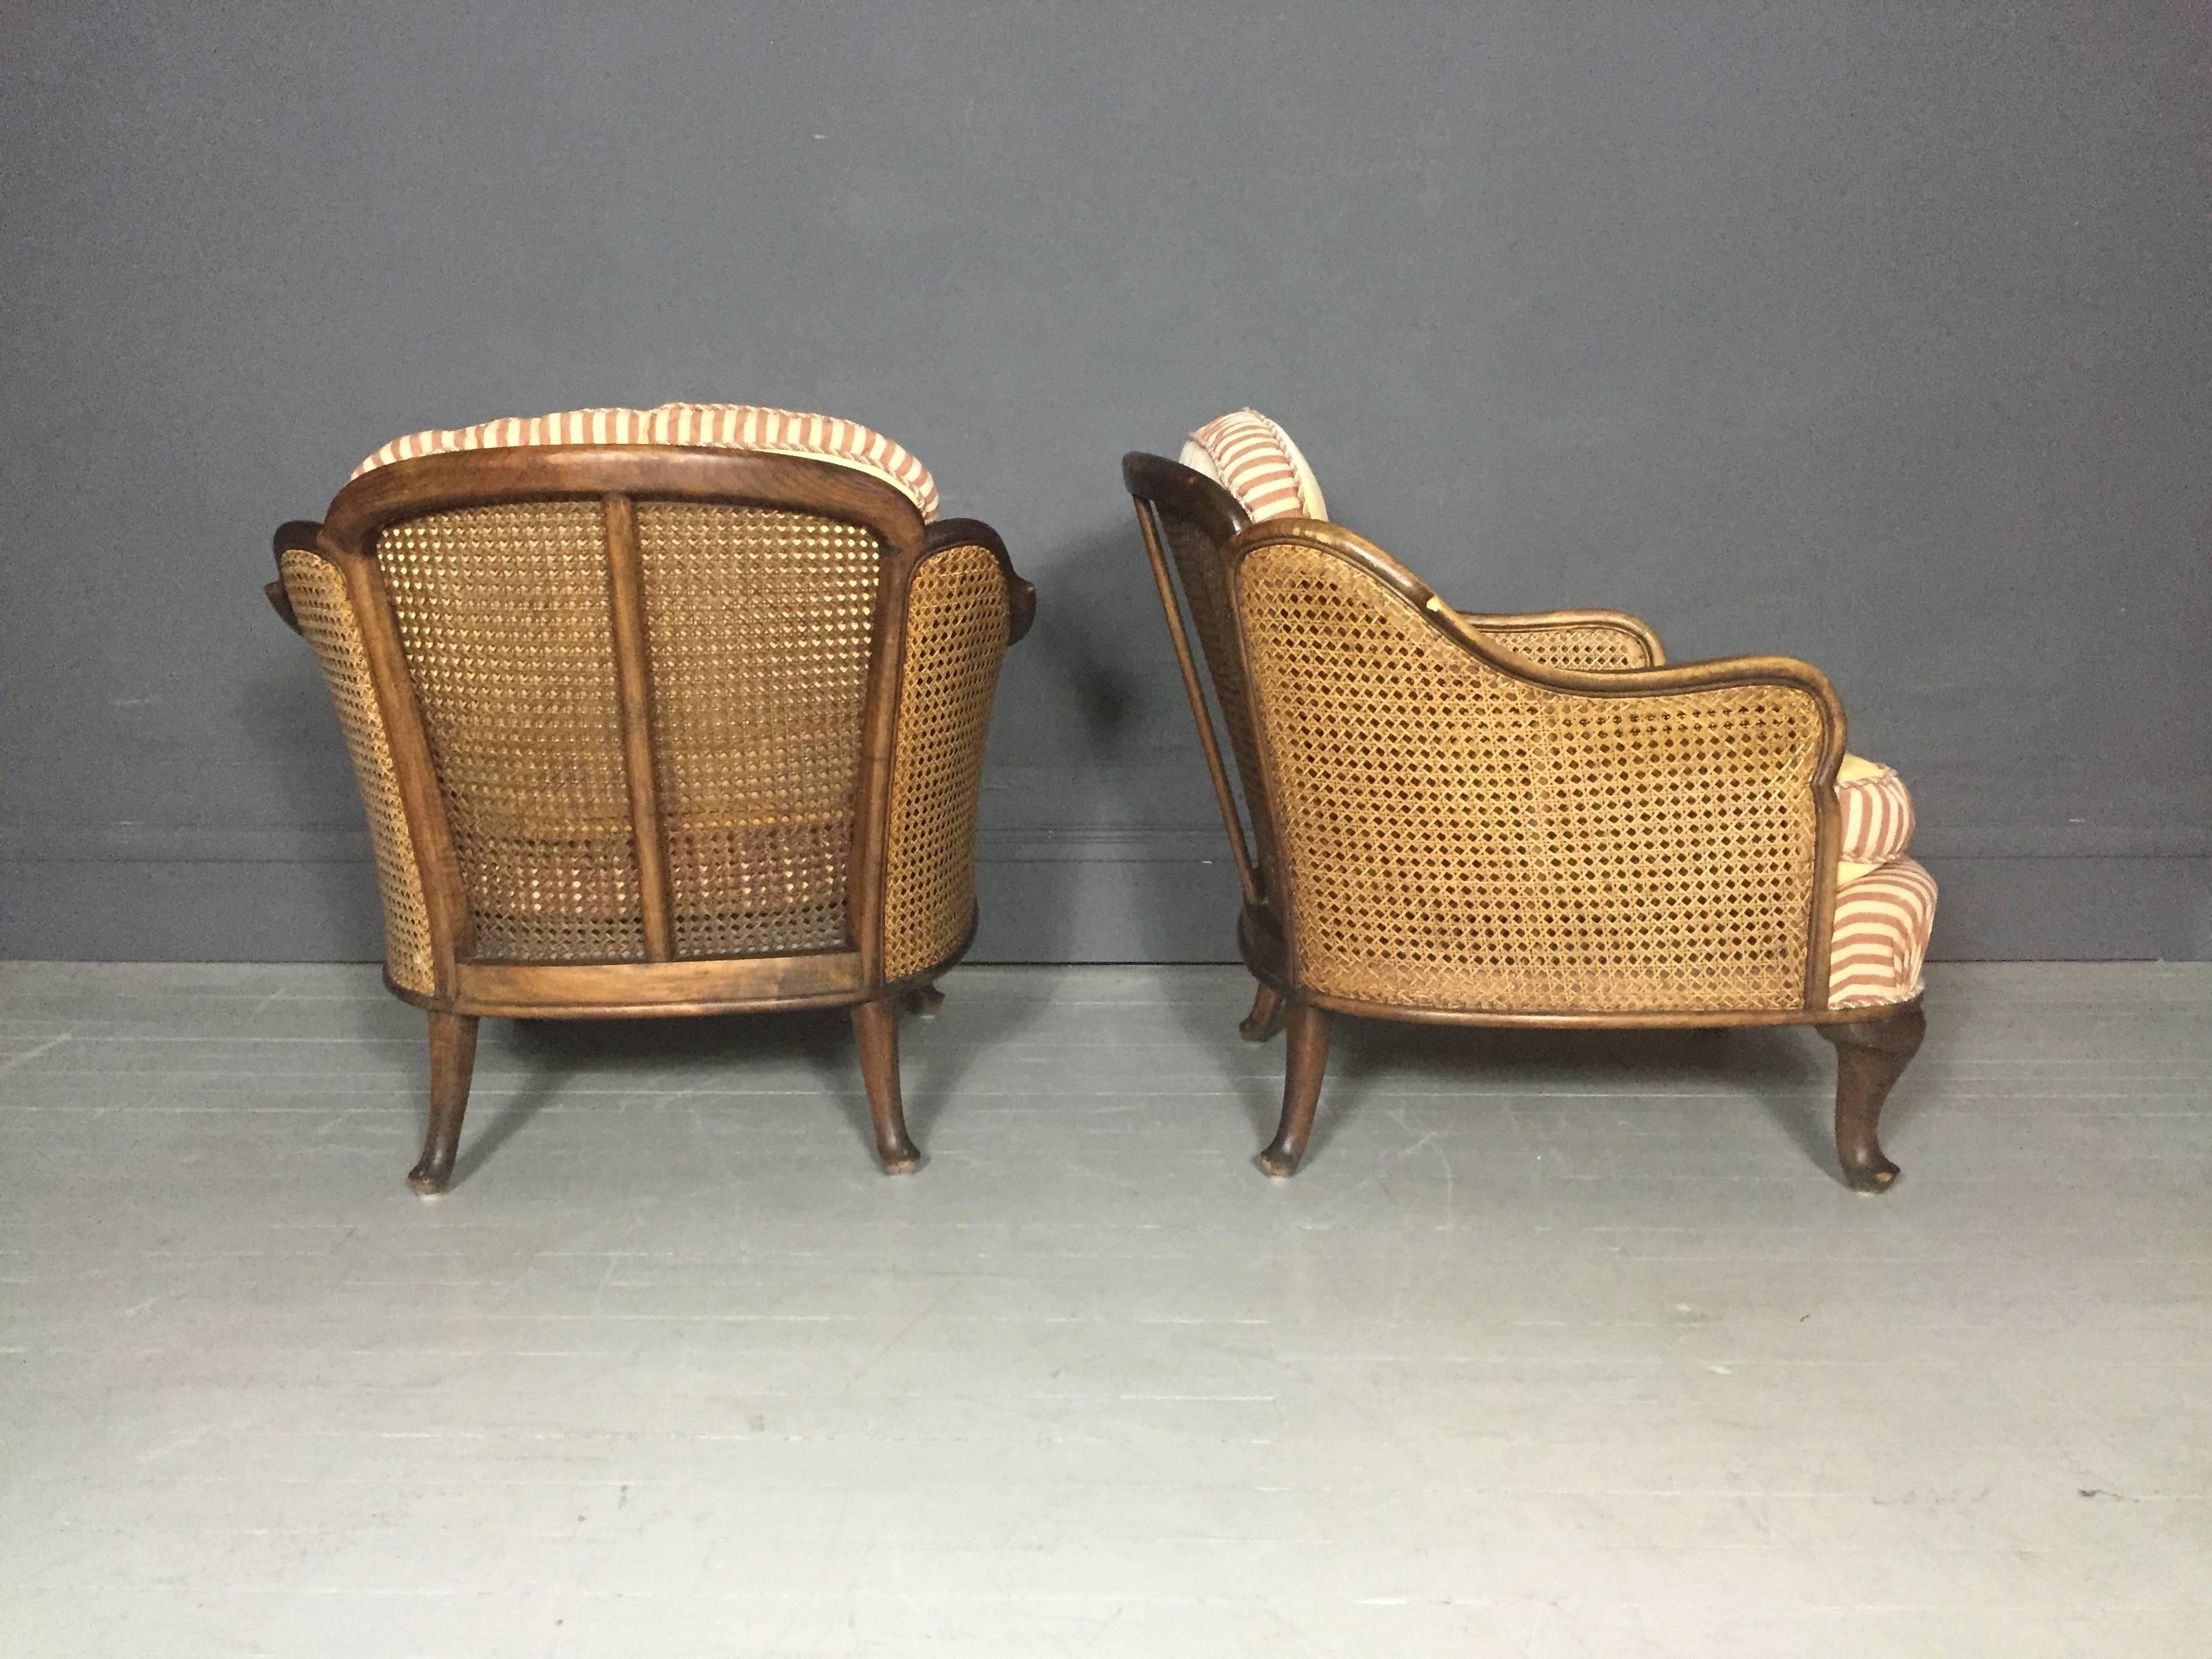 Woven Pair of Bergere Tub Chairs, Walnut and Cane, Sweden, 1930s